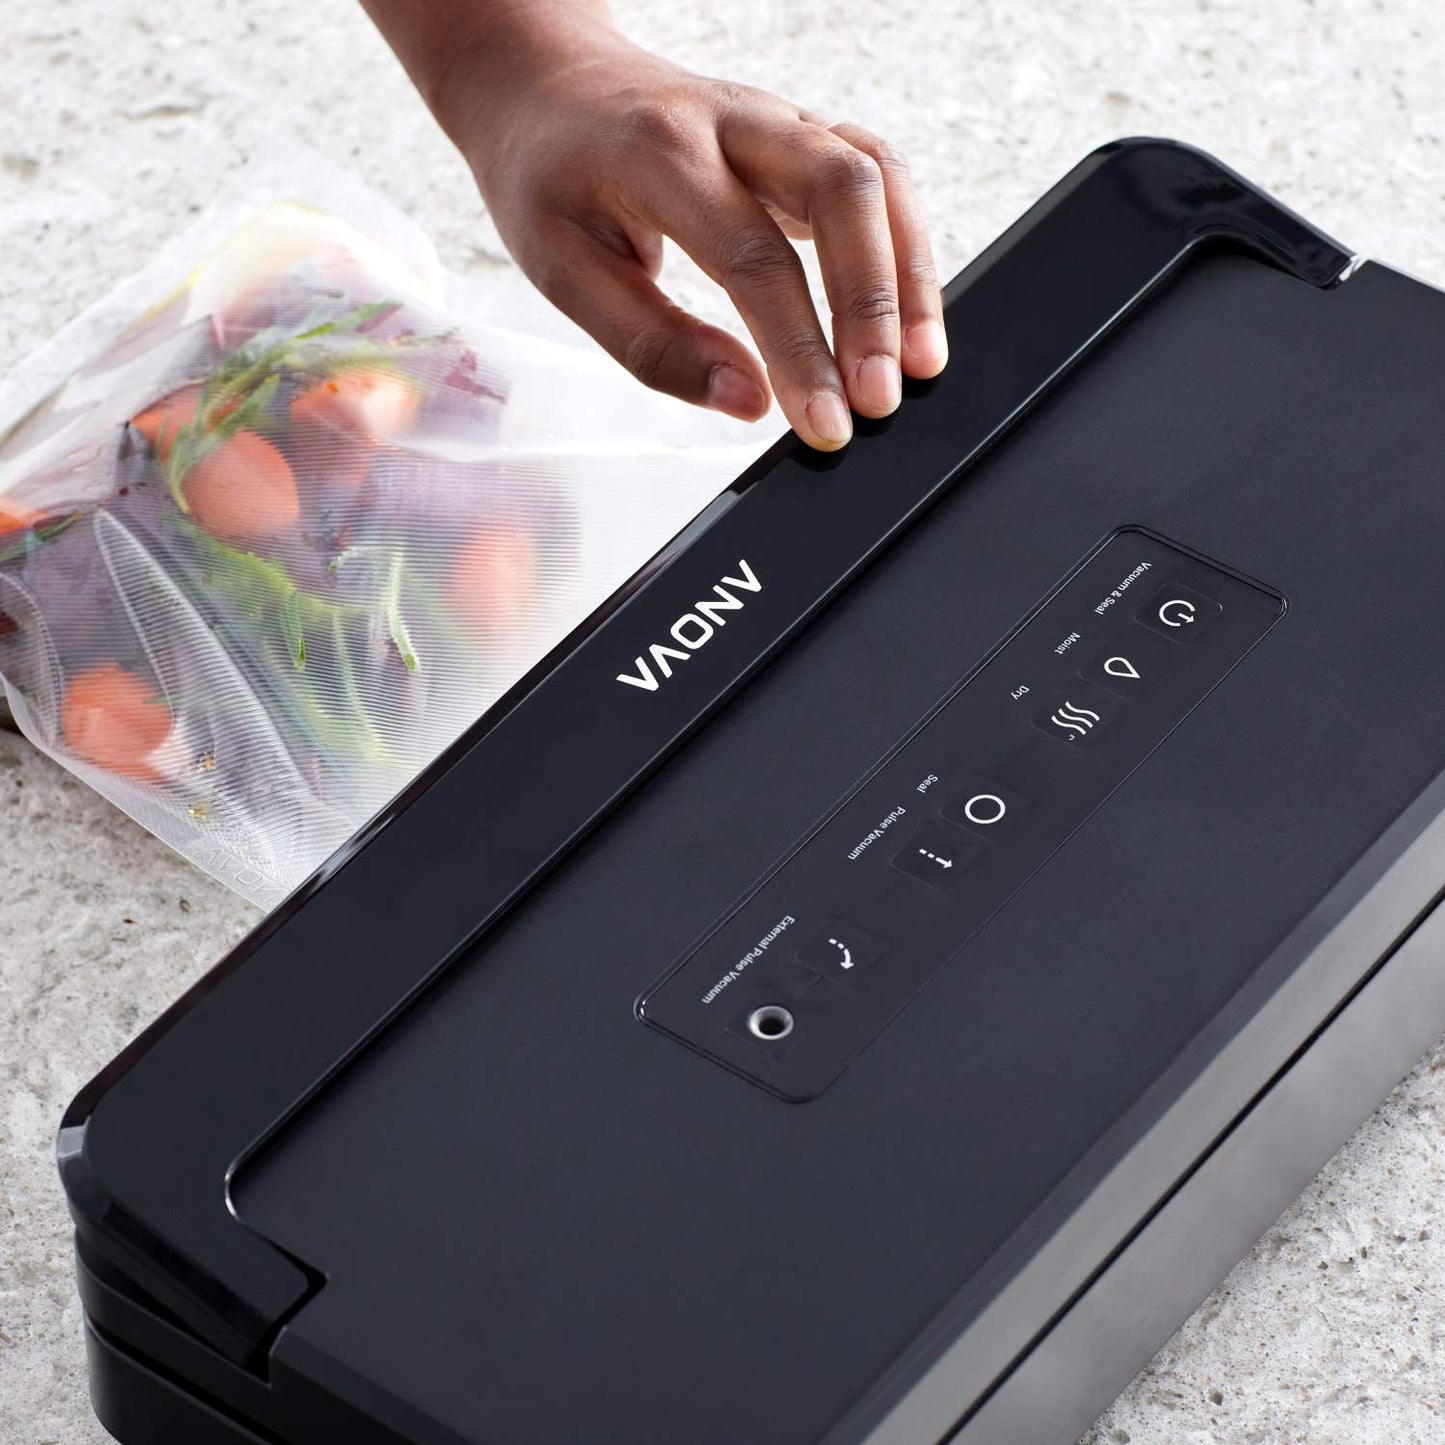 Anova Culinary Precision Vacuum Sealer Pro, Includes 1 Bag Roll, For Sous Vide and Food Storage, black, medium - Like New